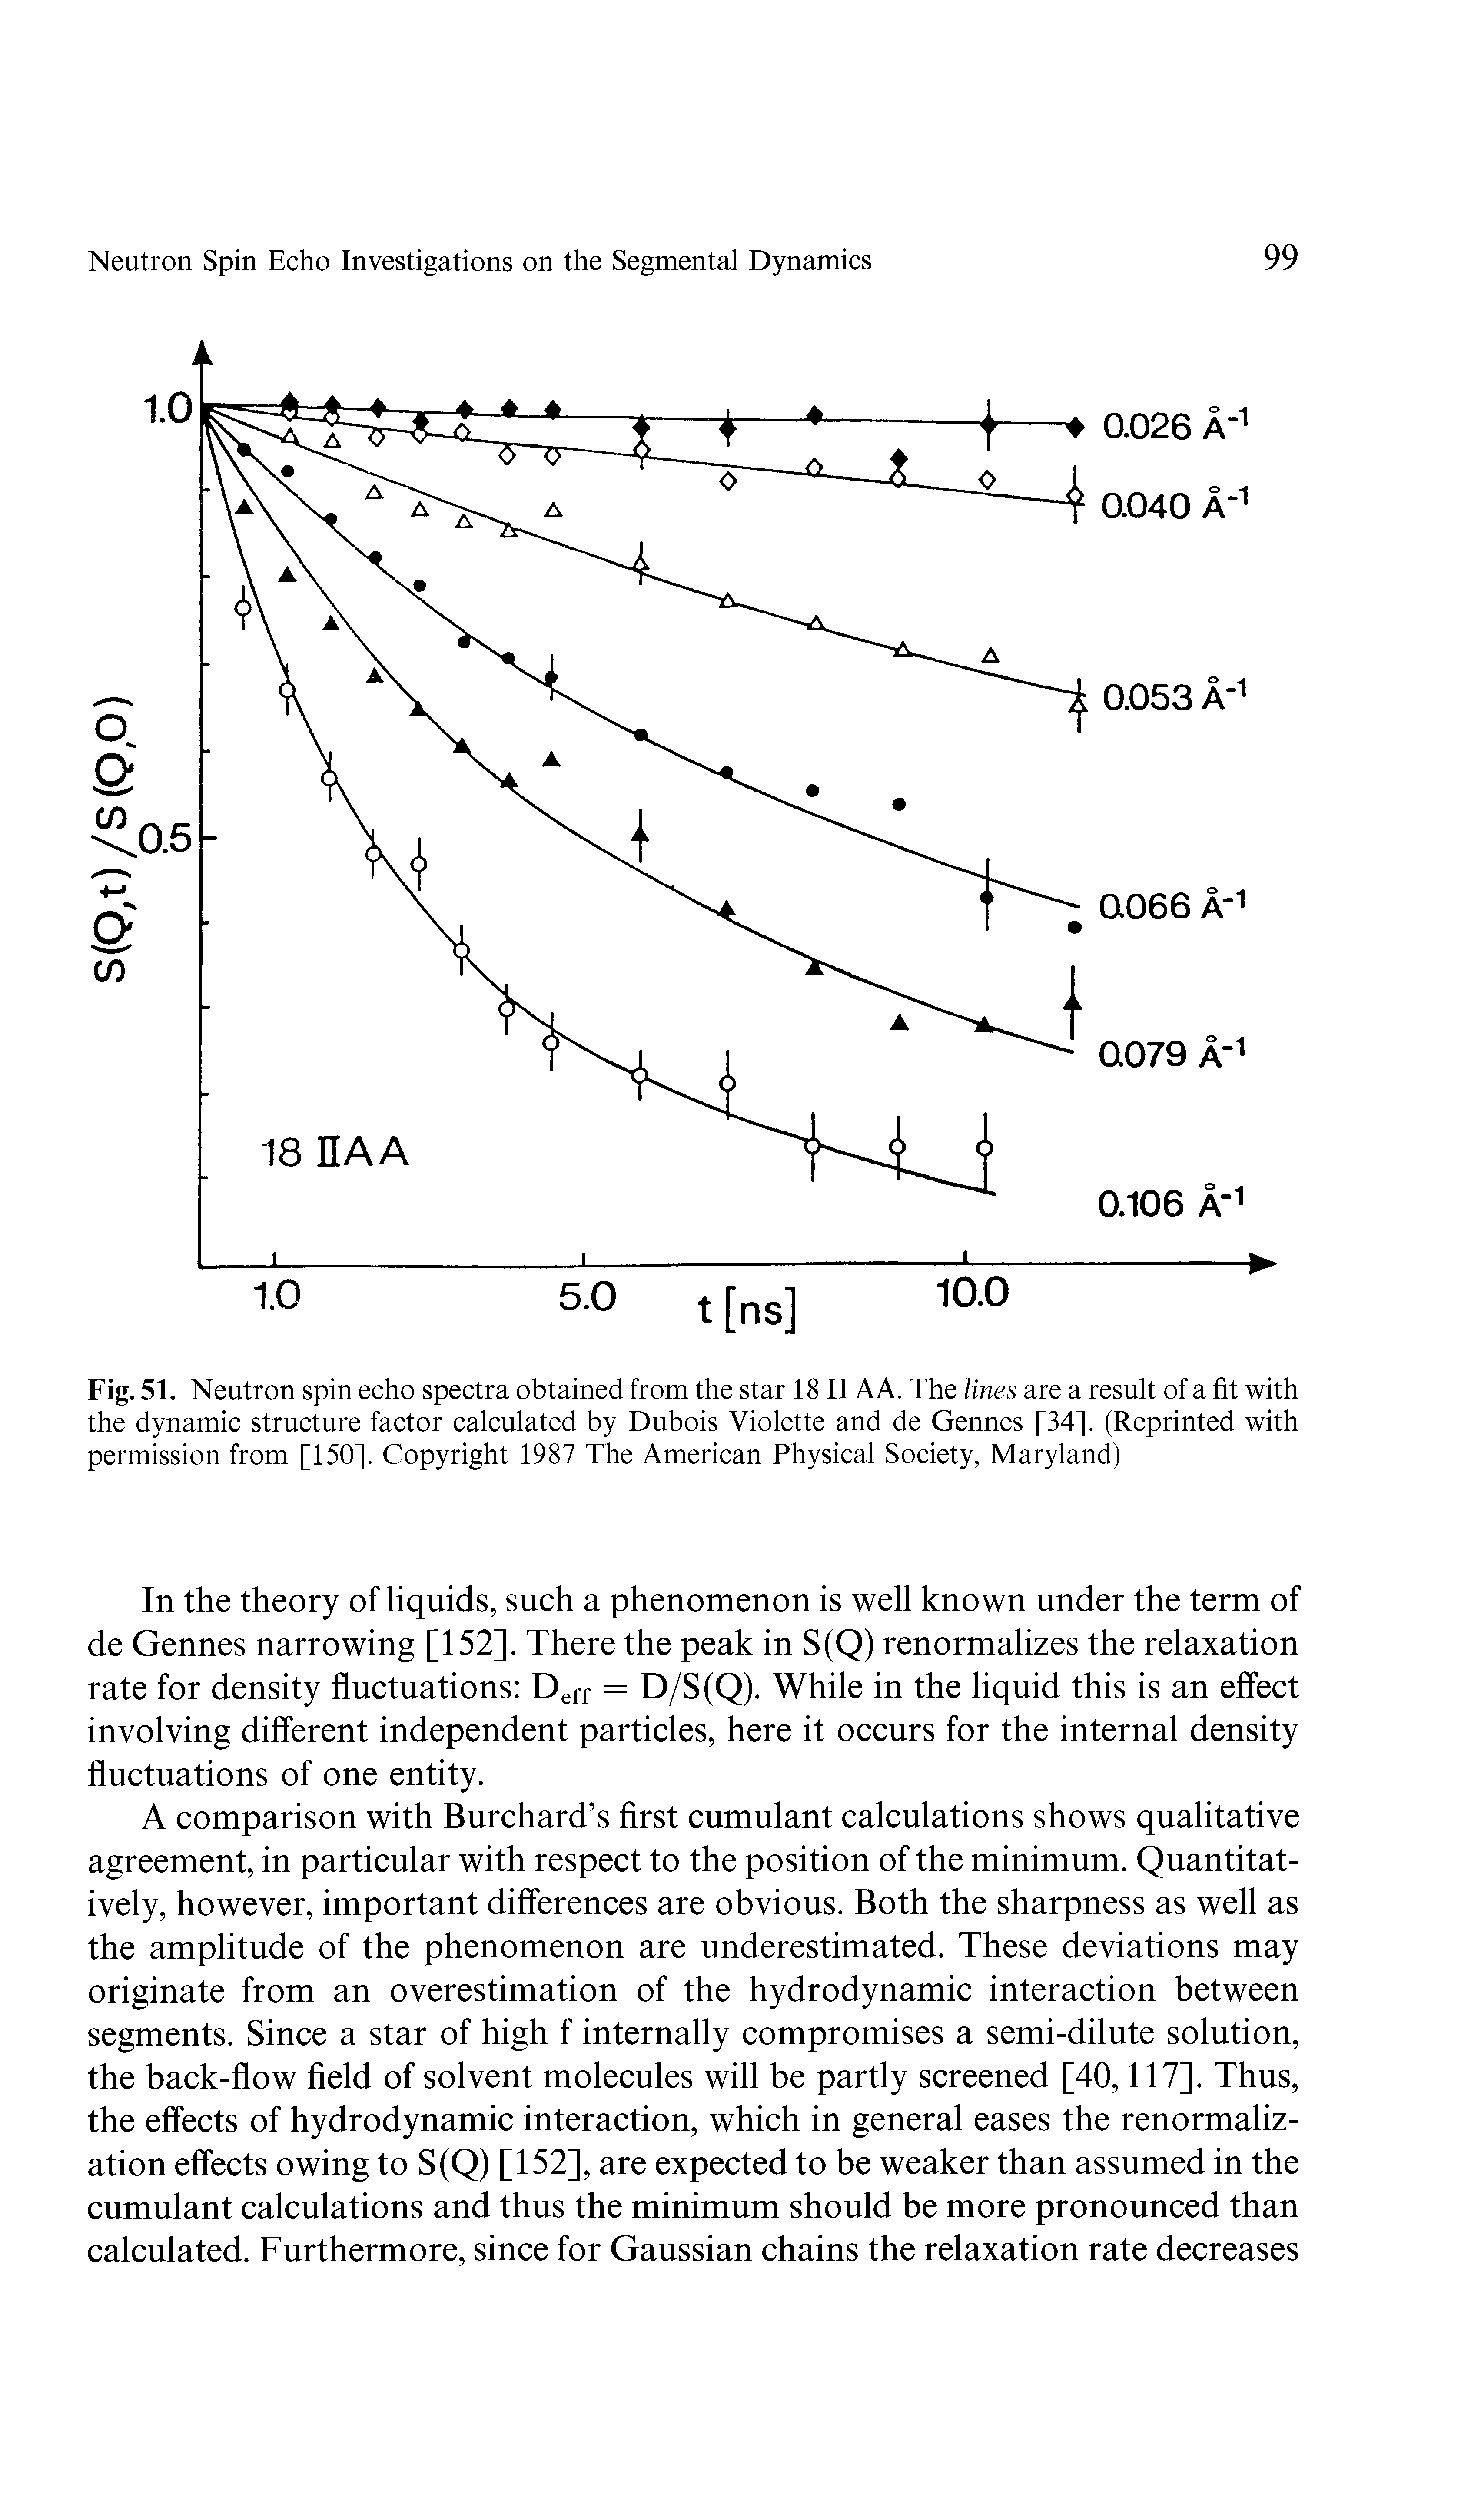 Fig. 51. Neutron spin echo spectra obtained from the star 18 IIAA. The lines are a result of a fit with the dynamic structure factor calculated by Dubois Violette and de Gennes [34]. (Reprinted with permission from [150]. Copyright 1987 The American Physical Society, Maryland)...